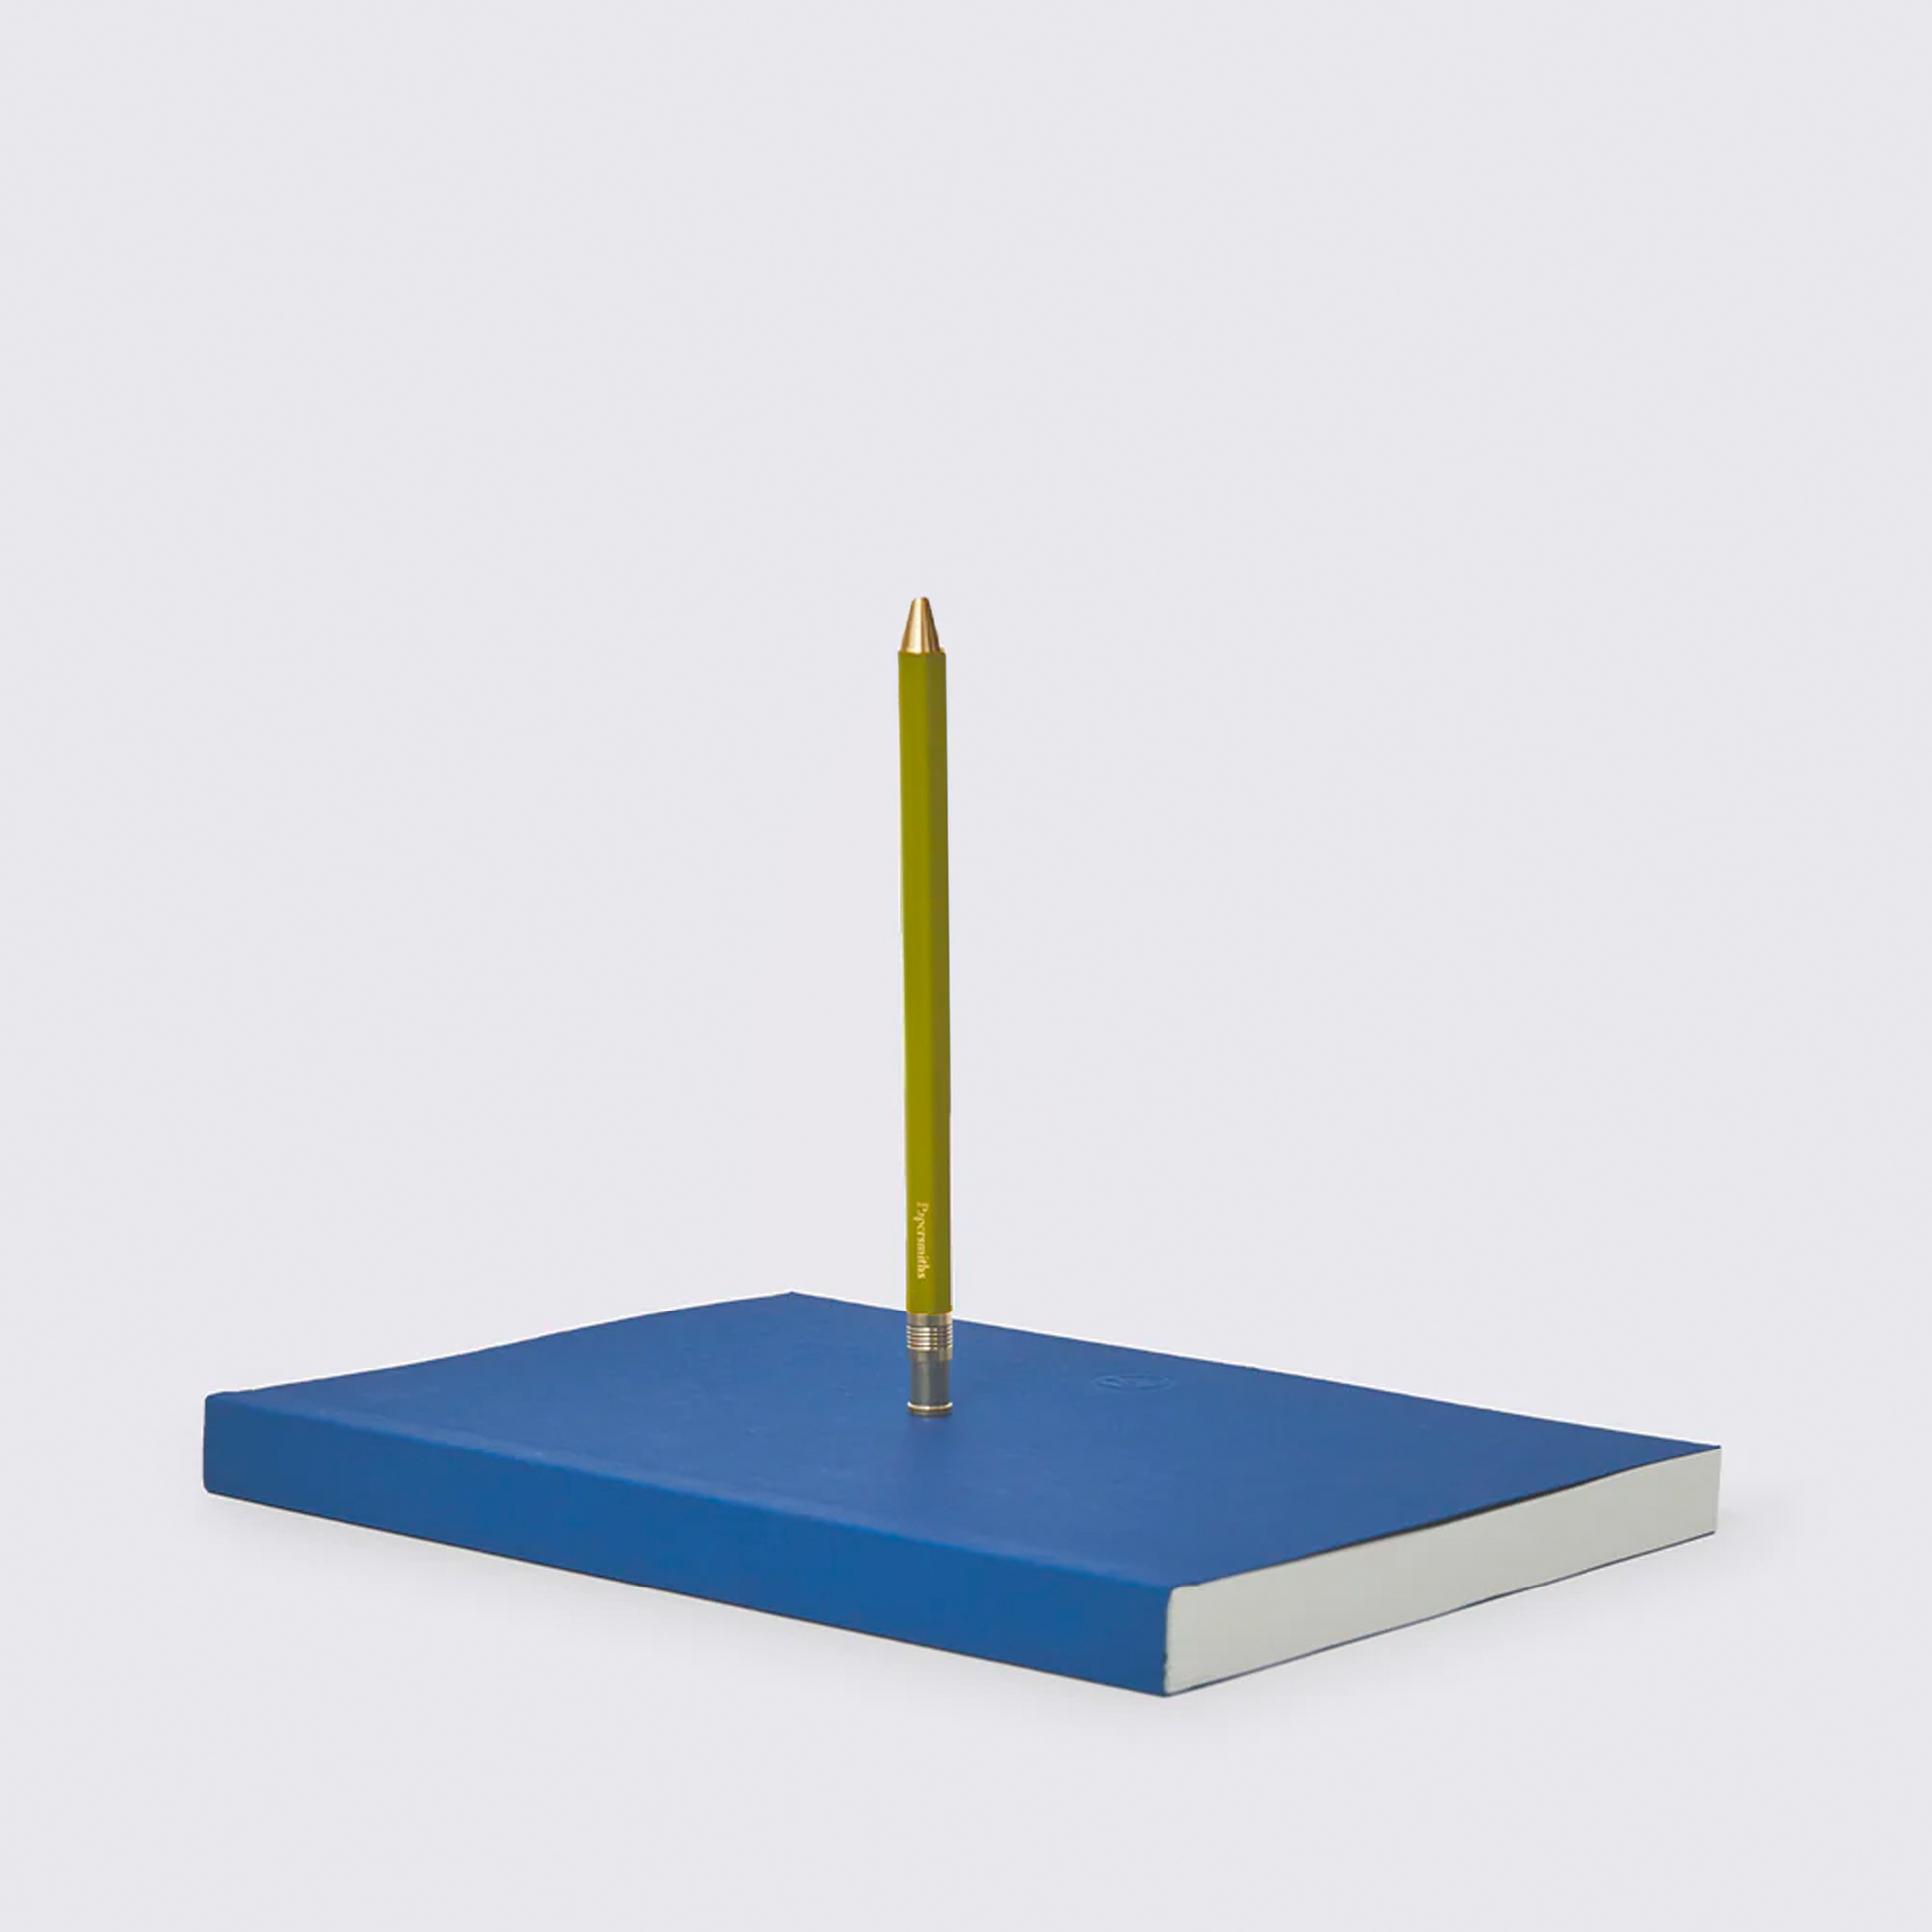 Navy blue notebook and Olive green pen